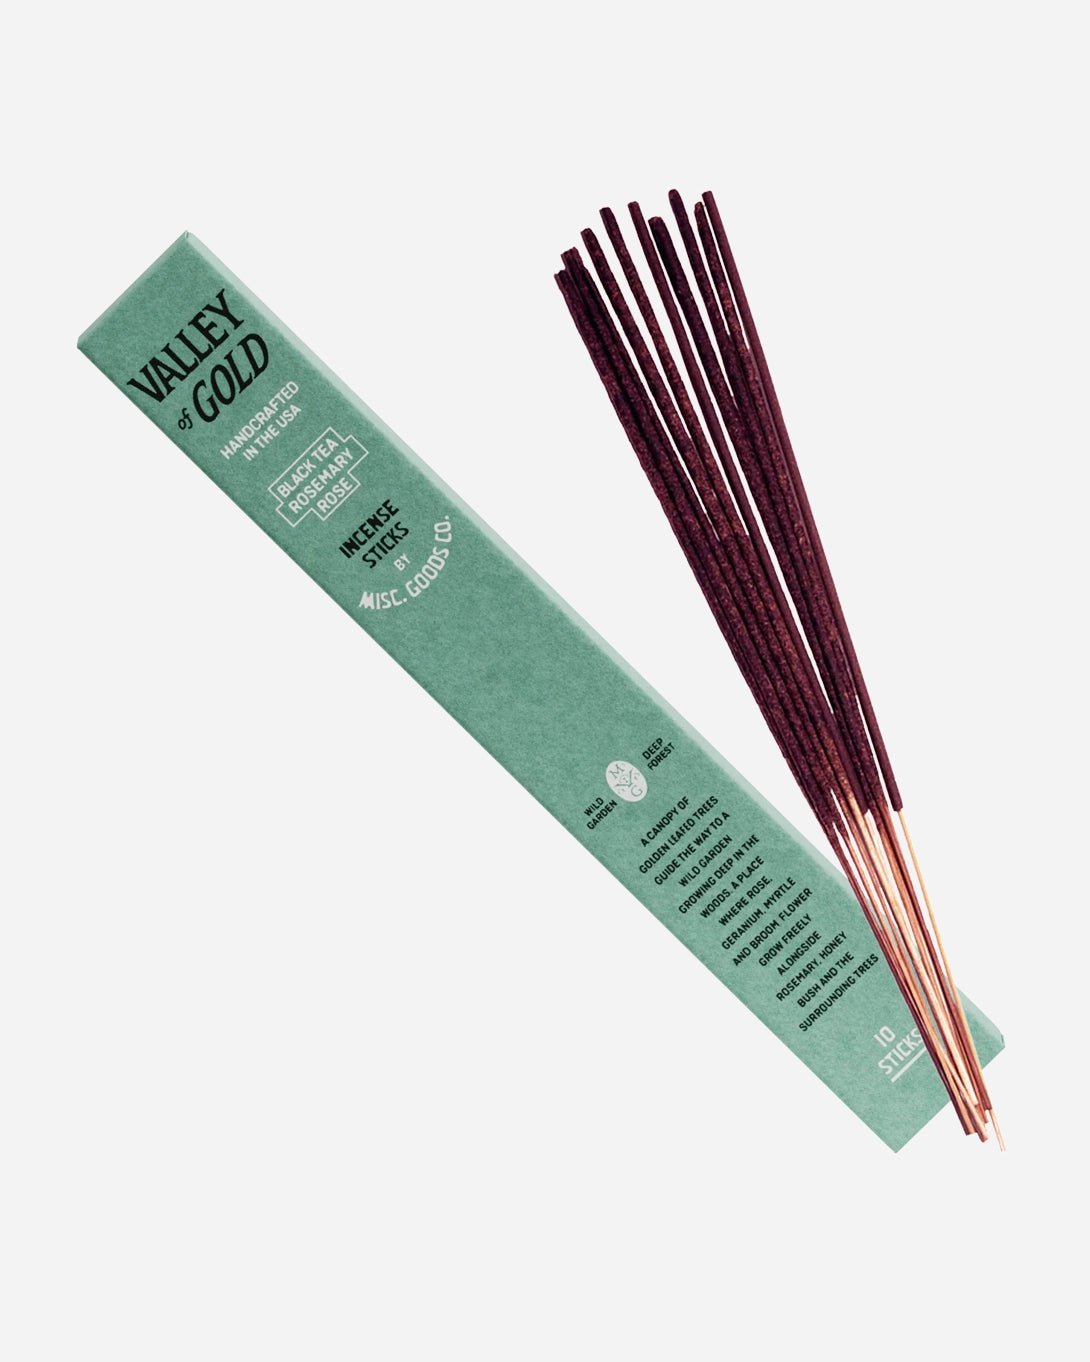 Valley of Gold Misc. Goods Incense Sticks